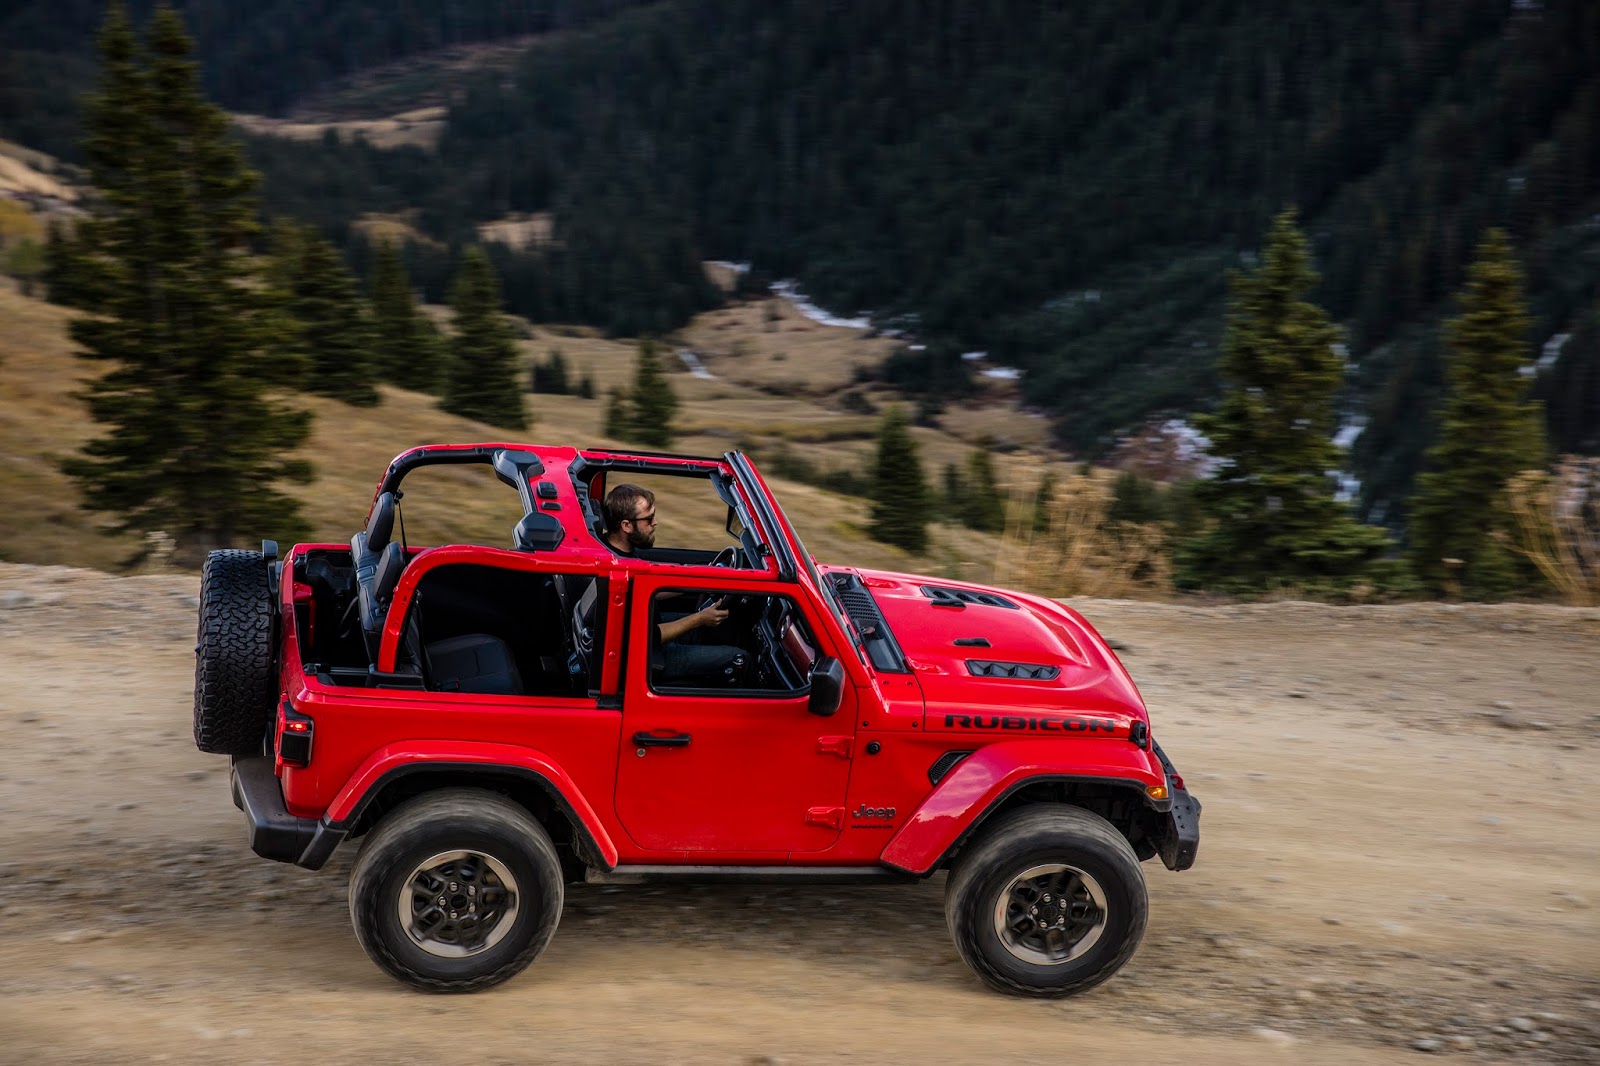 All-new 2018 Jeep® Wrangler’s Modern Approach to an Authentic Design